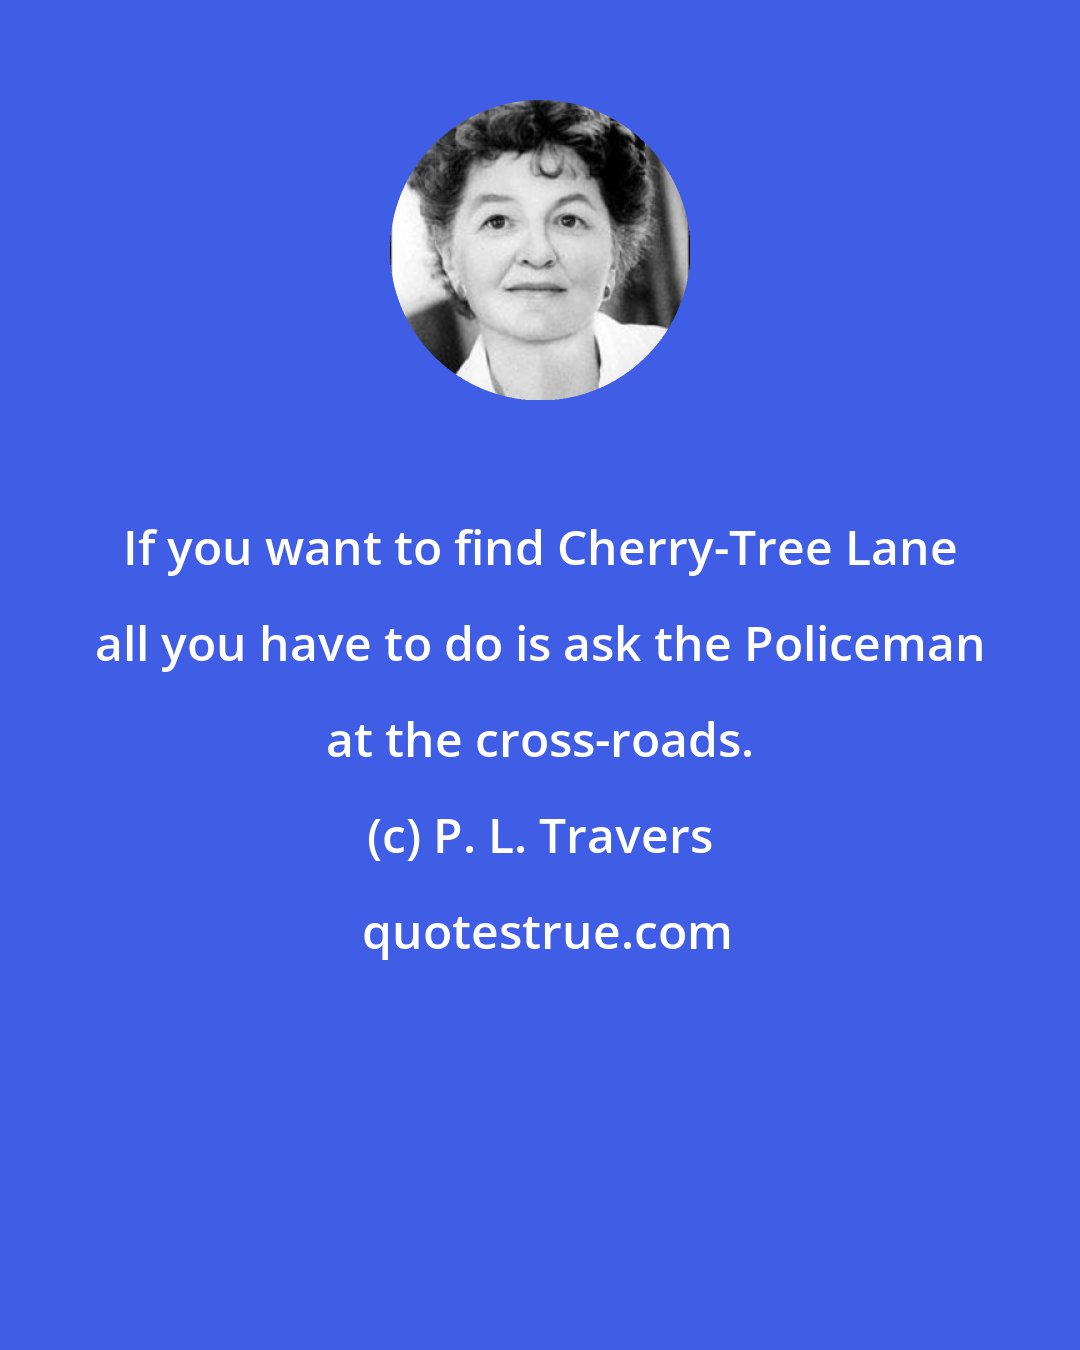 P. L. Travers: If you want to find Cherry-Tree Lane all you have to do is ask the Policeman at the cross-roads.